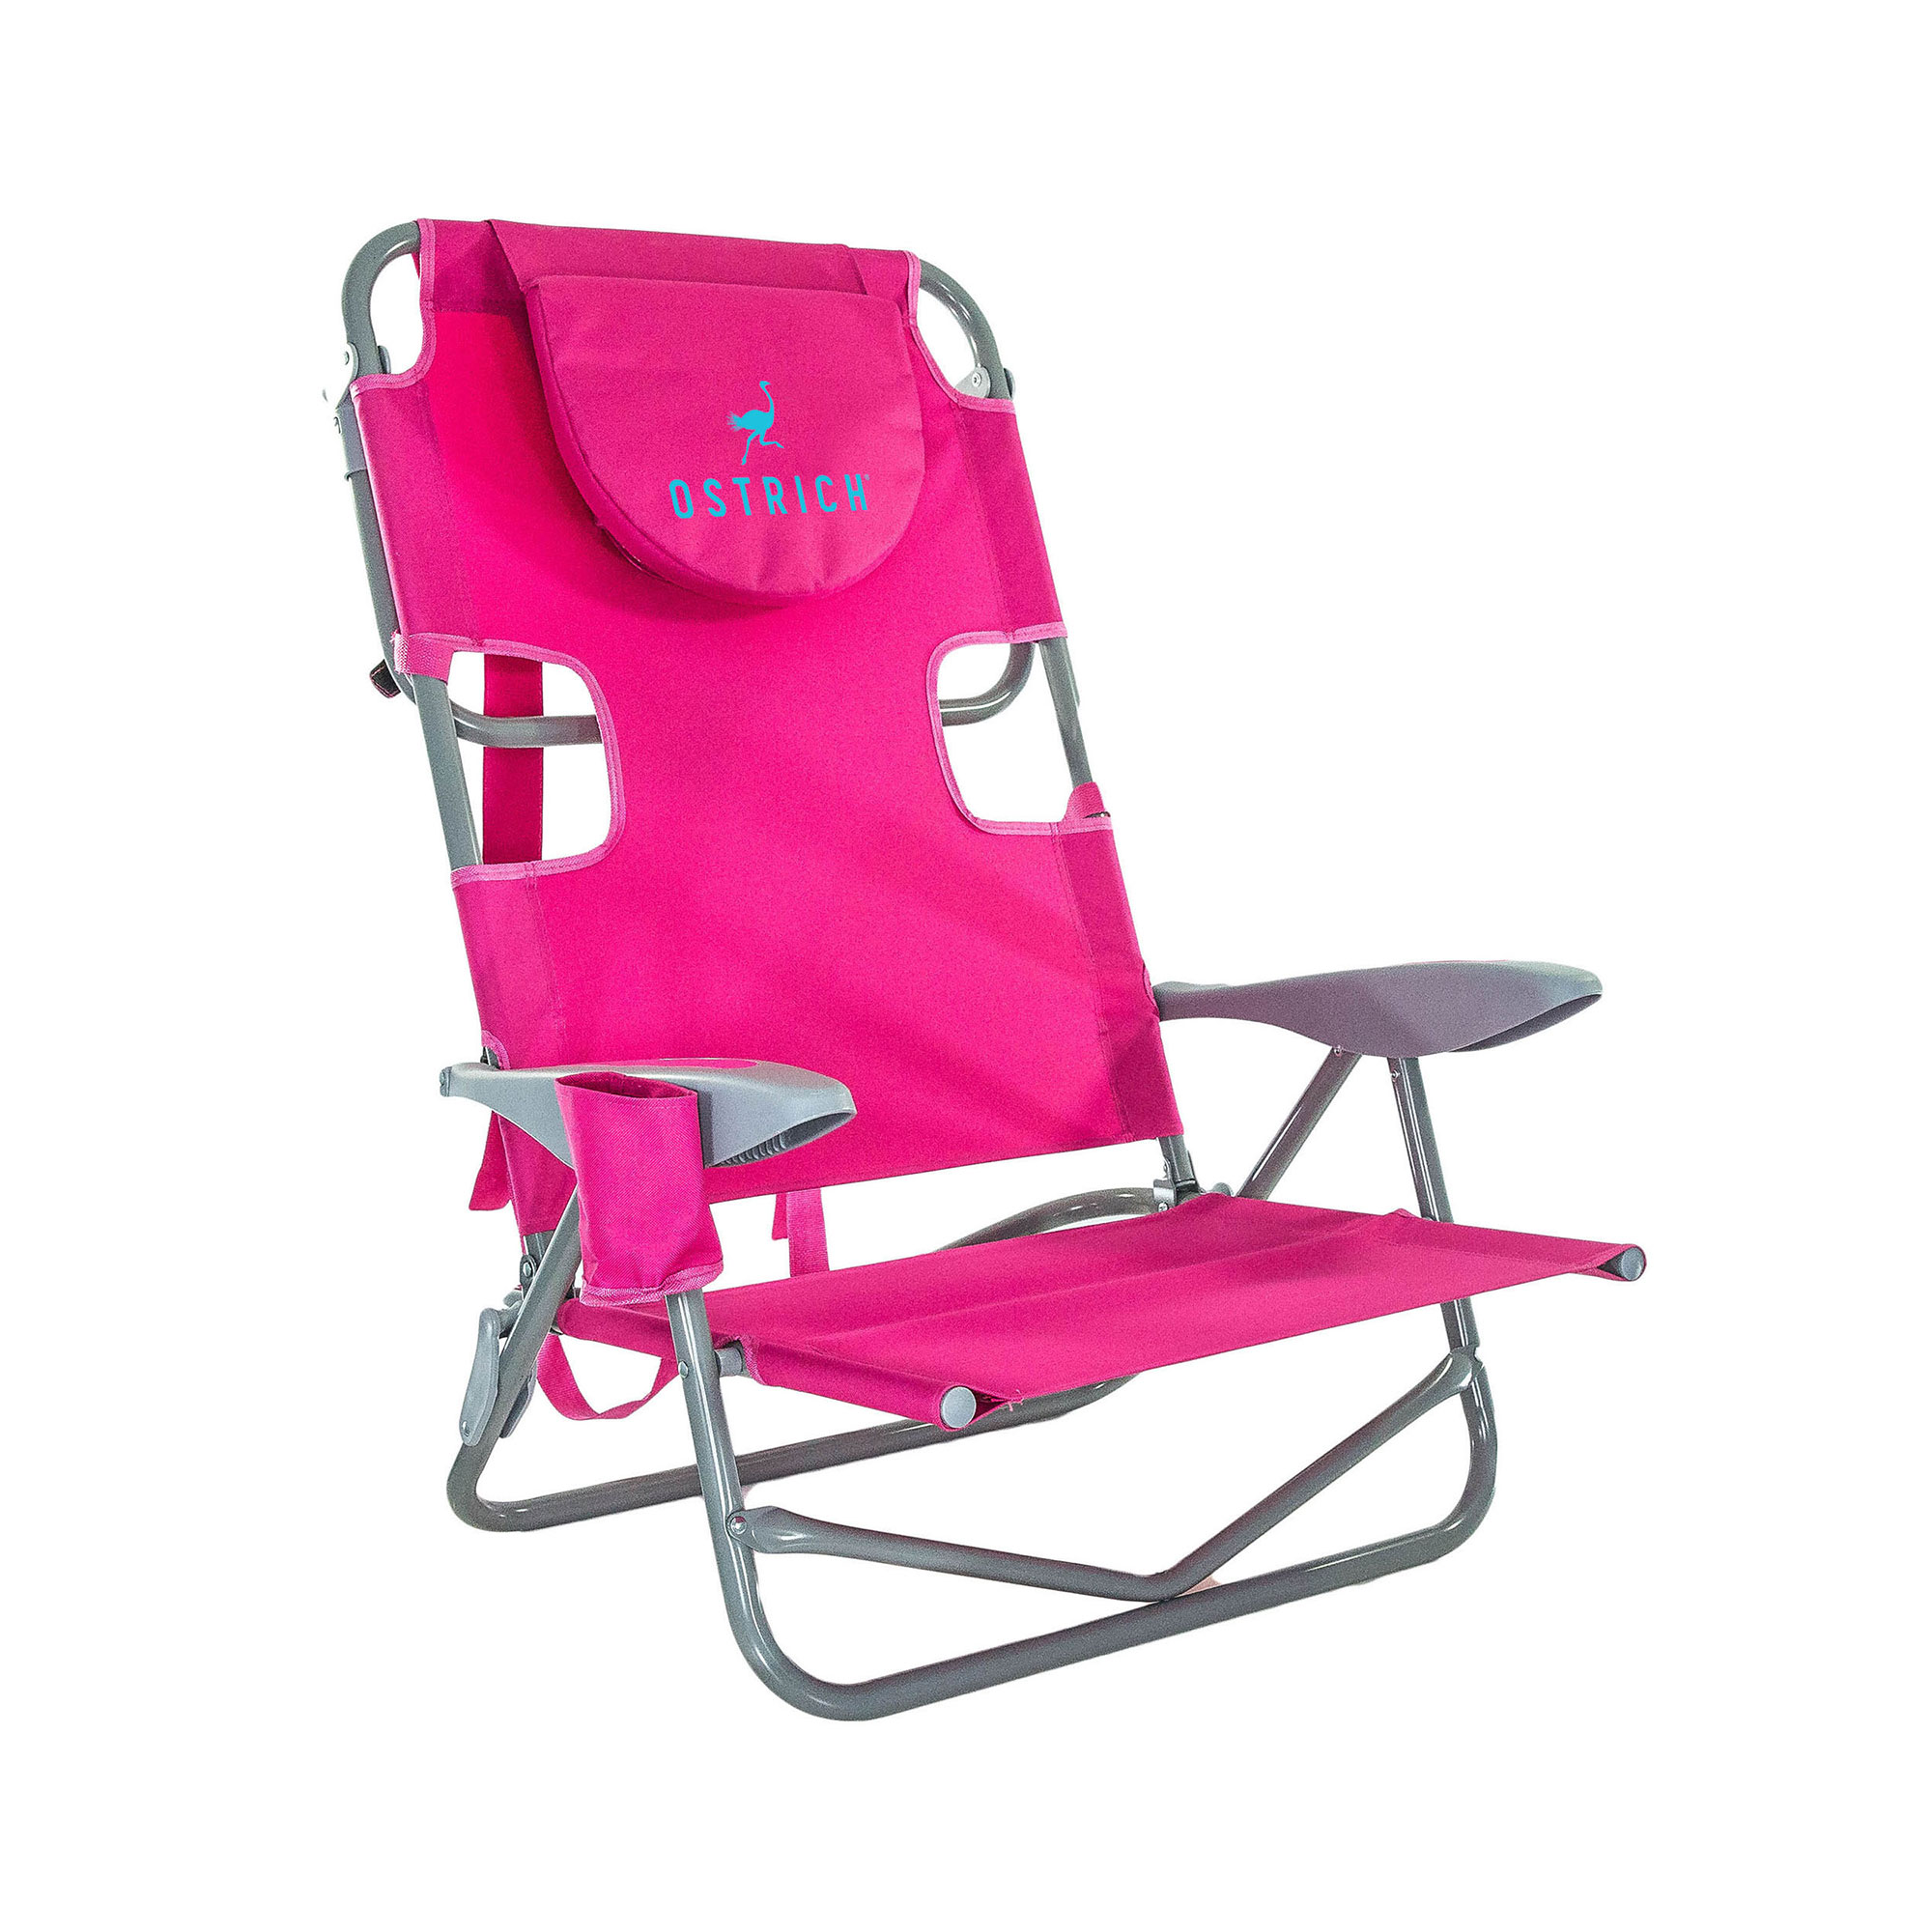 Ostrich On-Your-Back Outdoor Reclining Beach Pool Camping Chair, Pink - image 1 of 9